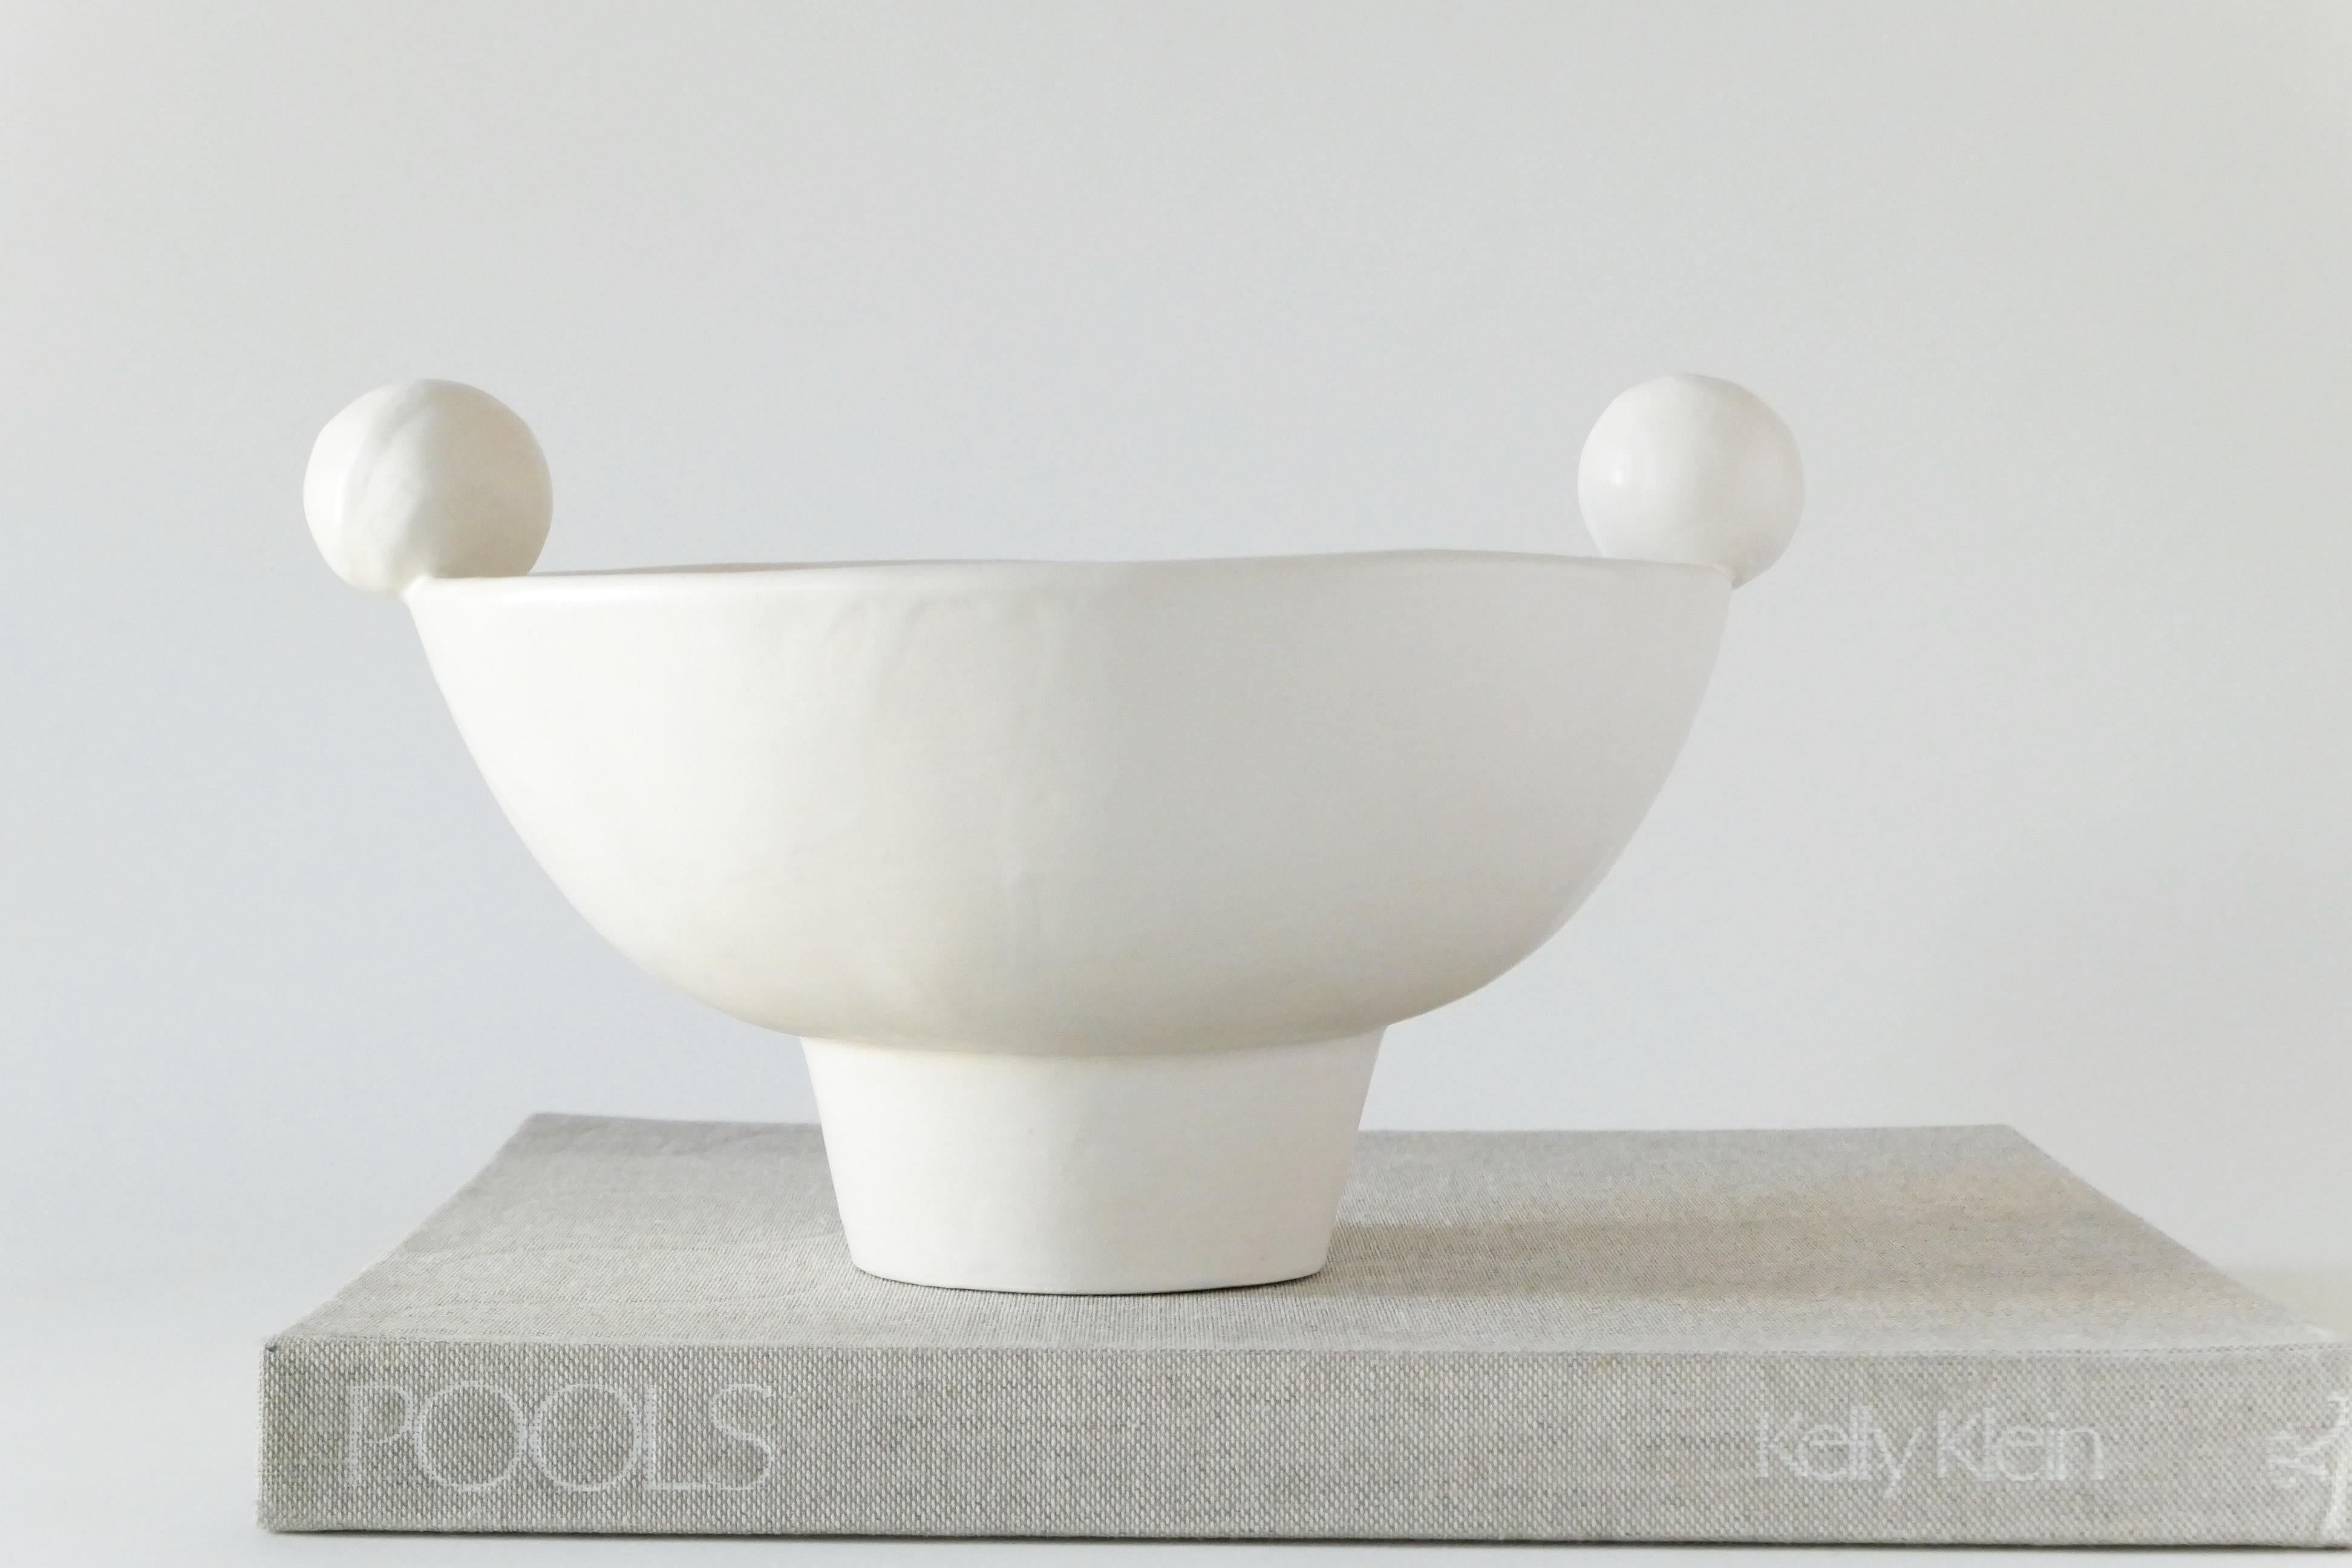 White footed stoneware bowl with a sphere detail. Finished with a soft, clear glaze.

Karina Vieira is a Brooklyn-based ceramicist focusing on handbuilt vessels. 

Her work references various styles, touching on the pre-Hispanic, the Bauhaus and